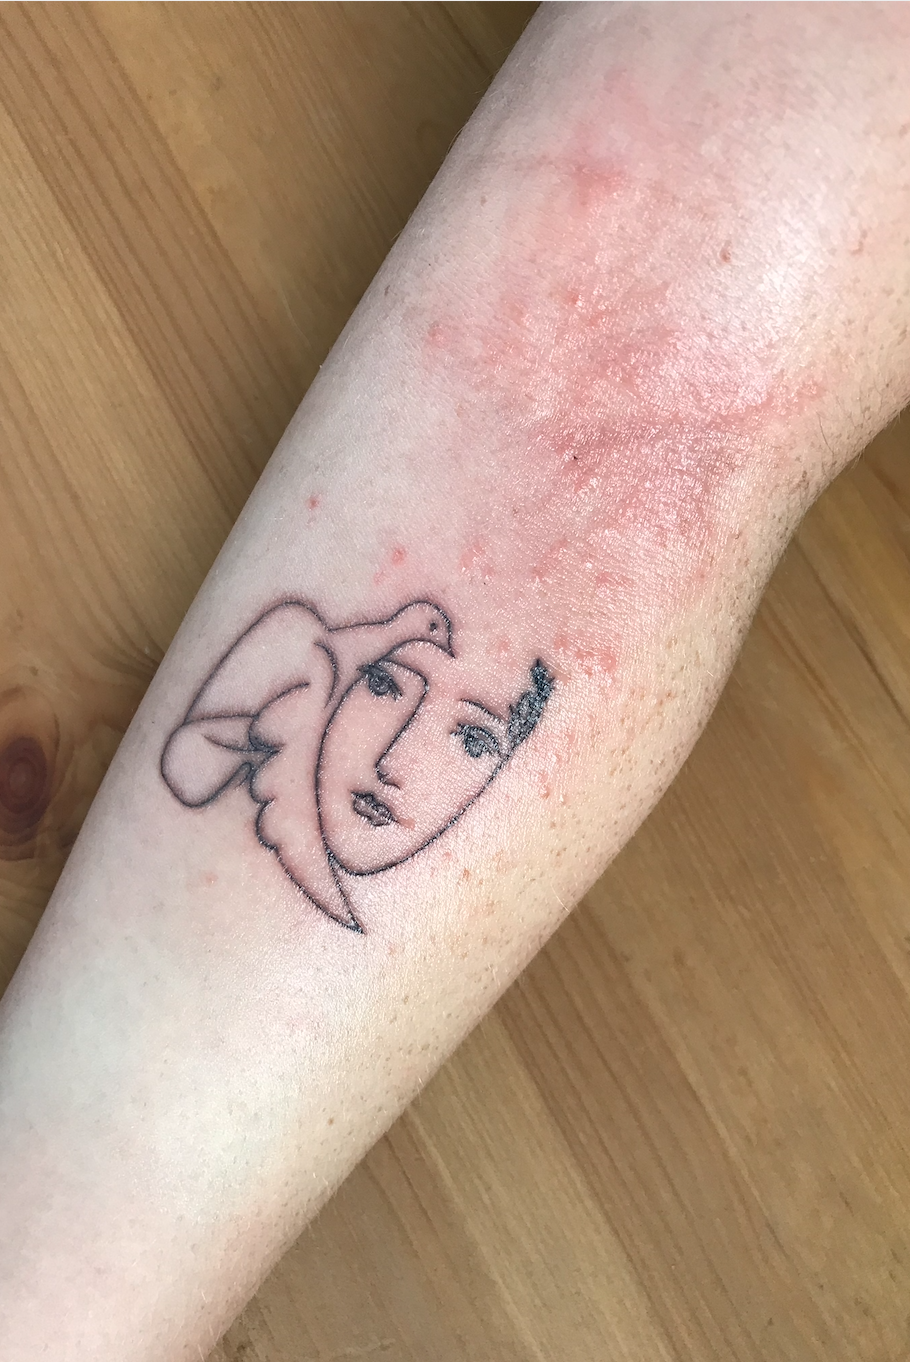 I got a fine line red ink tattoo about a year ago and it's nearly fully  faded. I plan to touch it up, and am curious if it's worth giving red ink